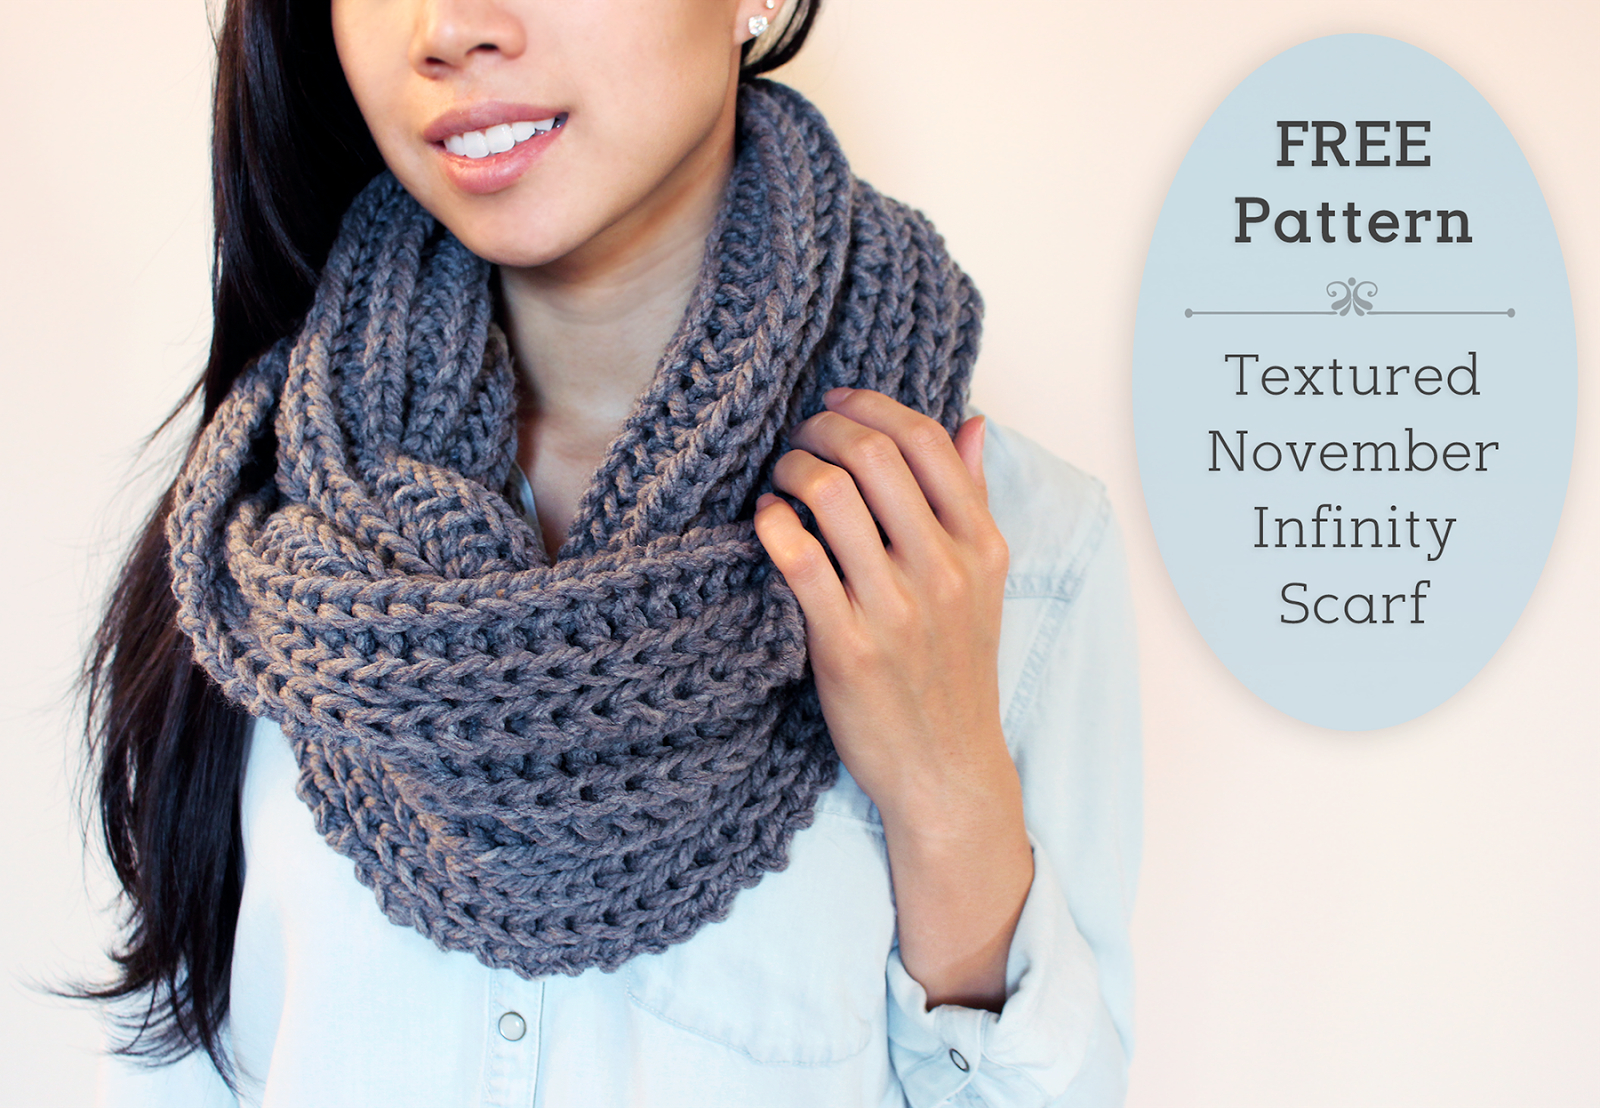 Free Knitting Patterns For Beginners Uk Chunky Scarf Knitting Patterns For Beginners Crochet And Free